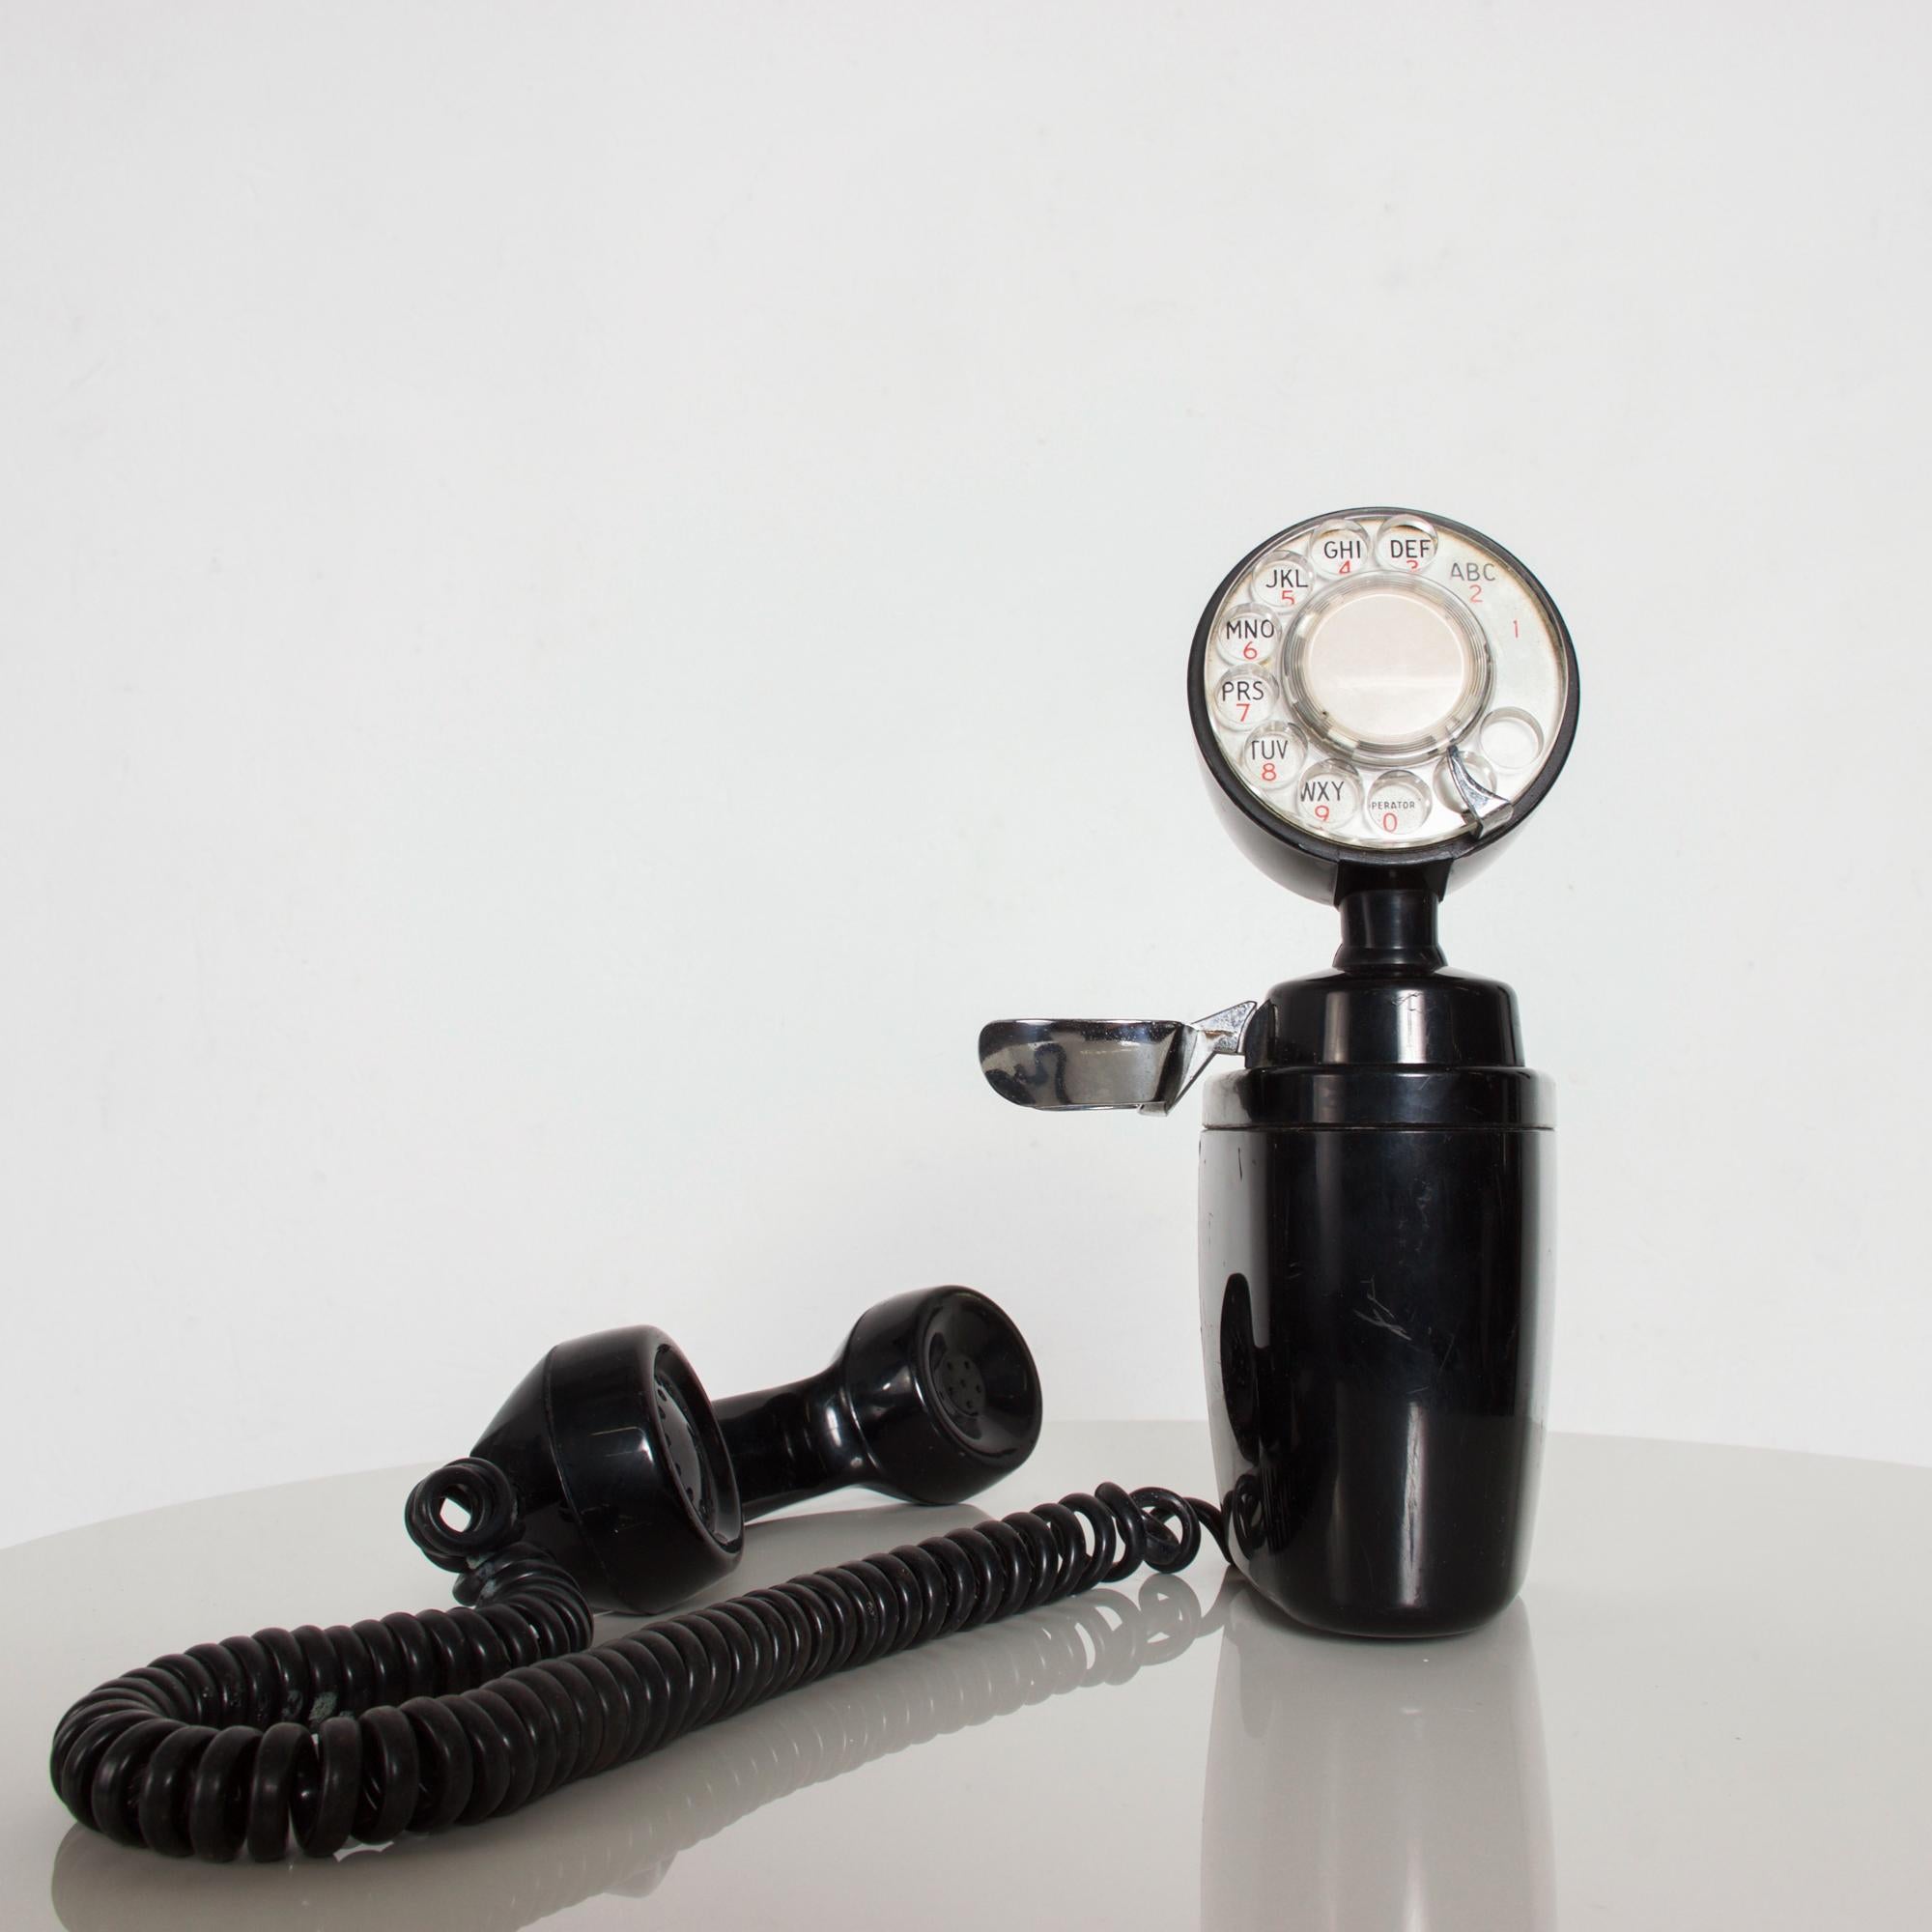 Art Deco American Electric Co black bakelite space saver side hanging rotary dial wall mount phone. Fabulous design.
Model: NB830C
Dimensions: 11.5